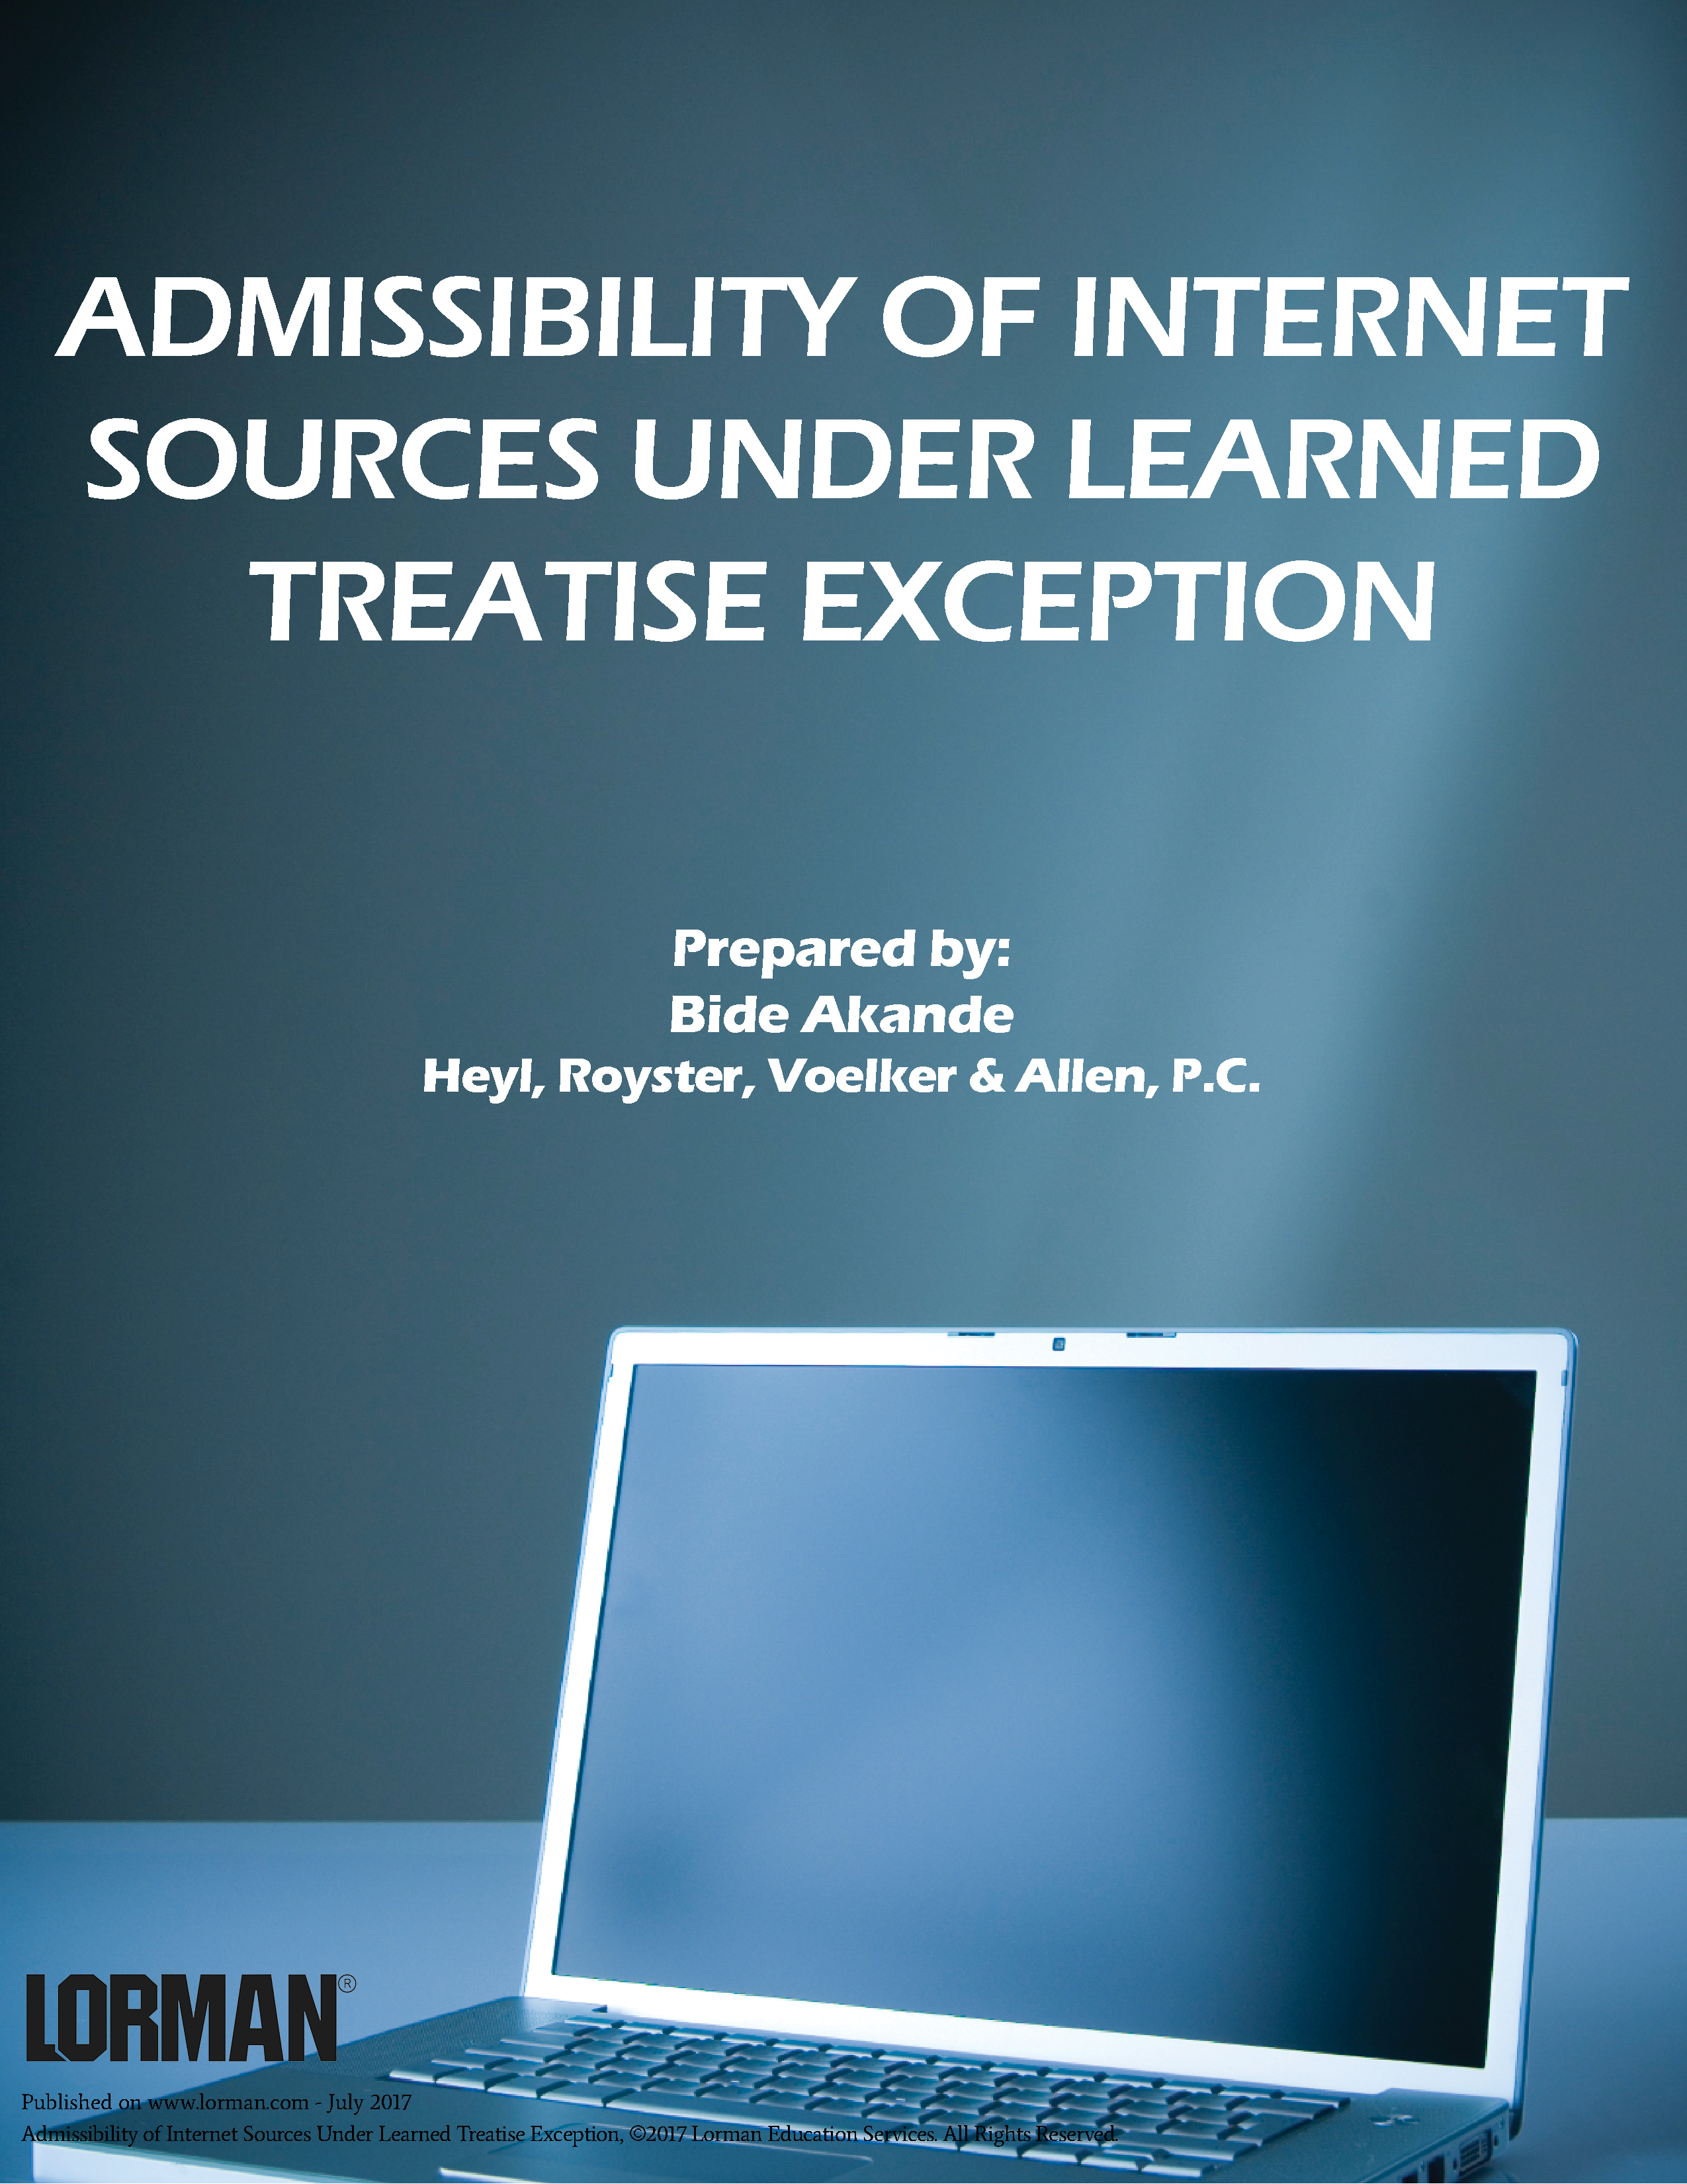 Admissibility of Internet Sources Under Learned Treatise Exception